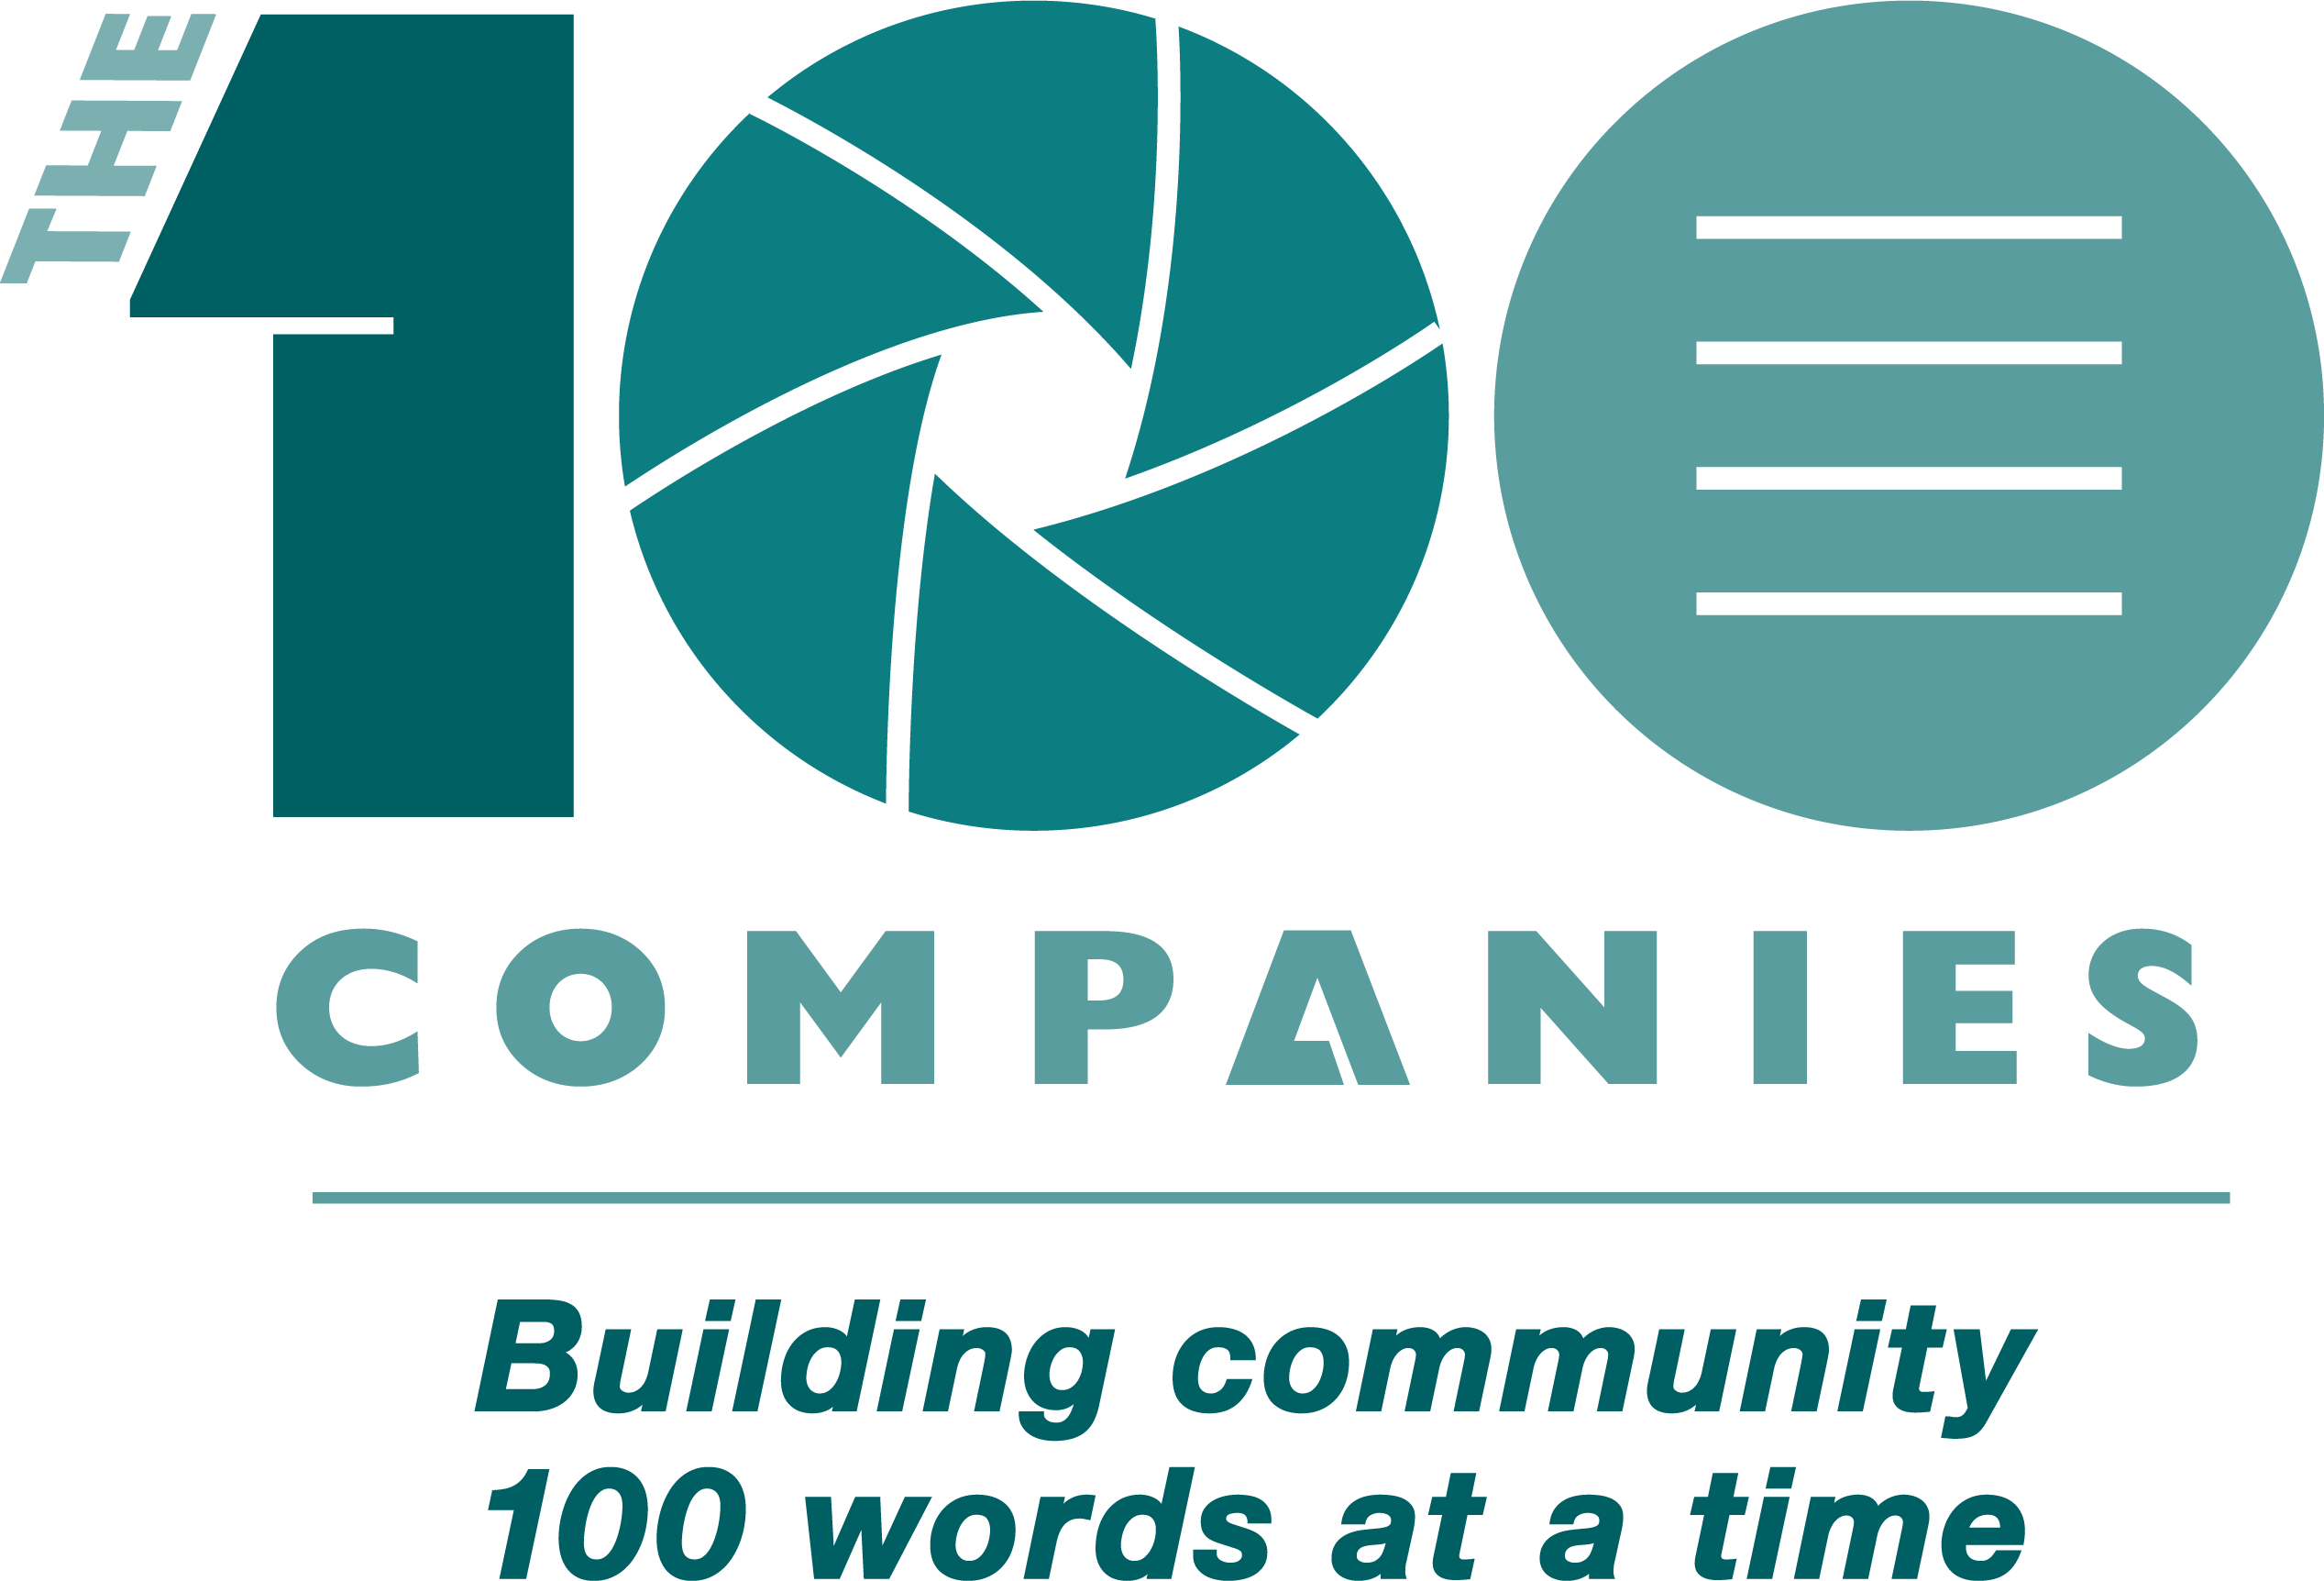 The 100 Companies, Building community 100 words at a time